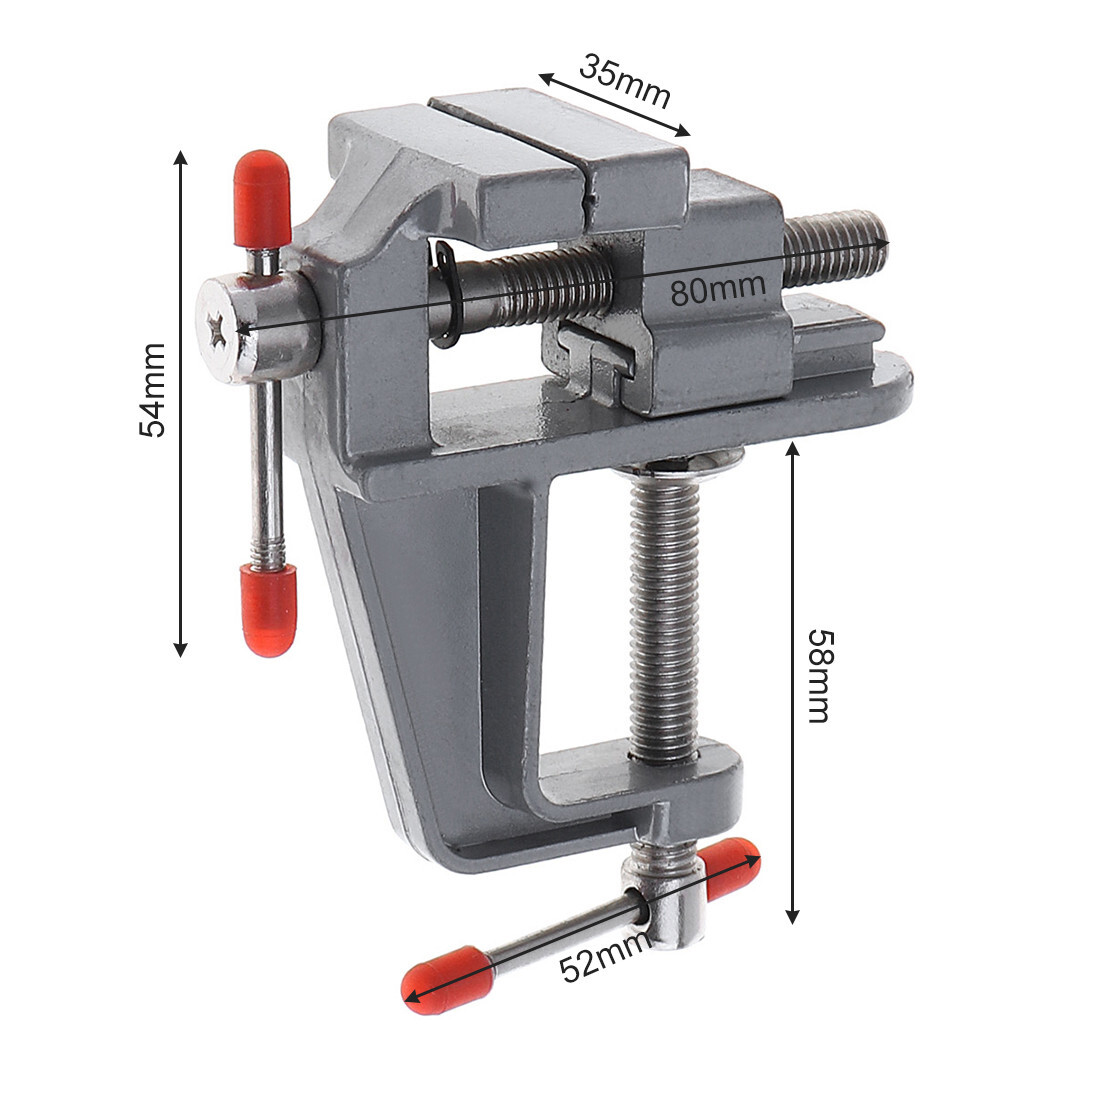 Universal Rotate 360° Work Clamp-on Vise